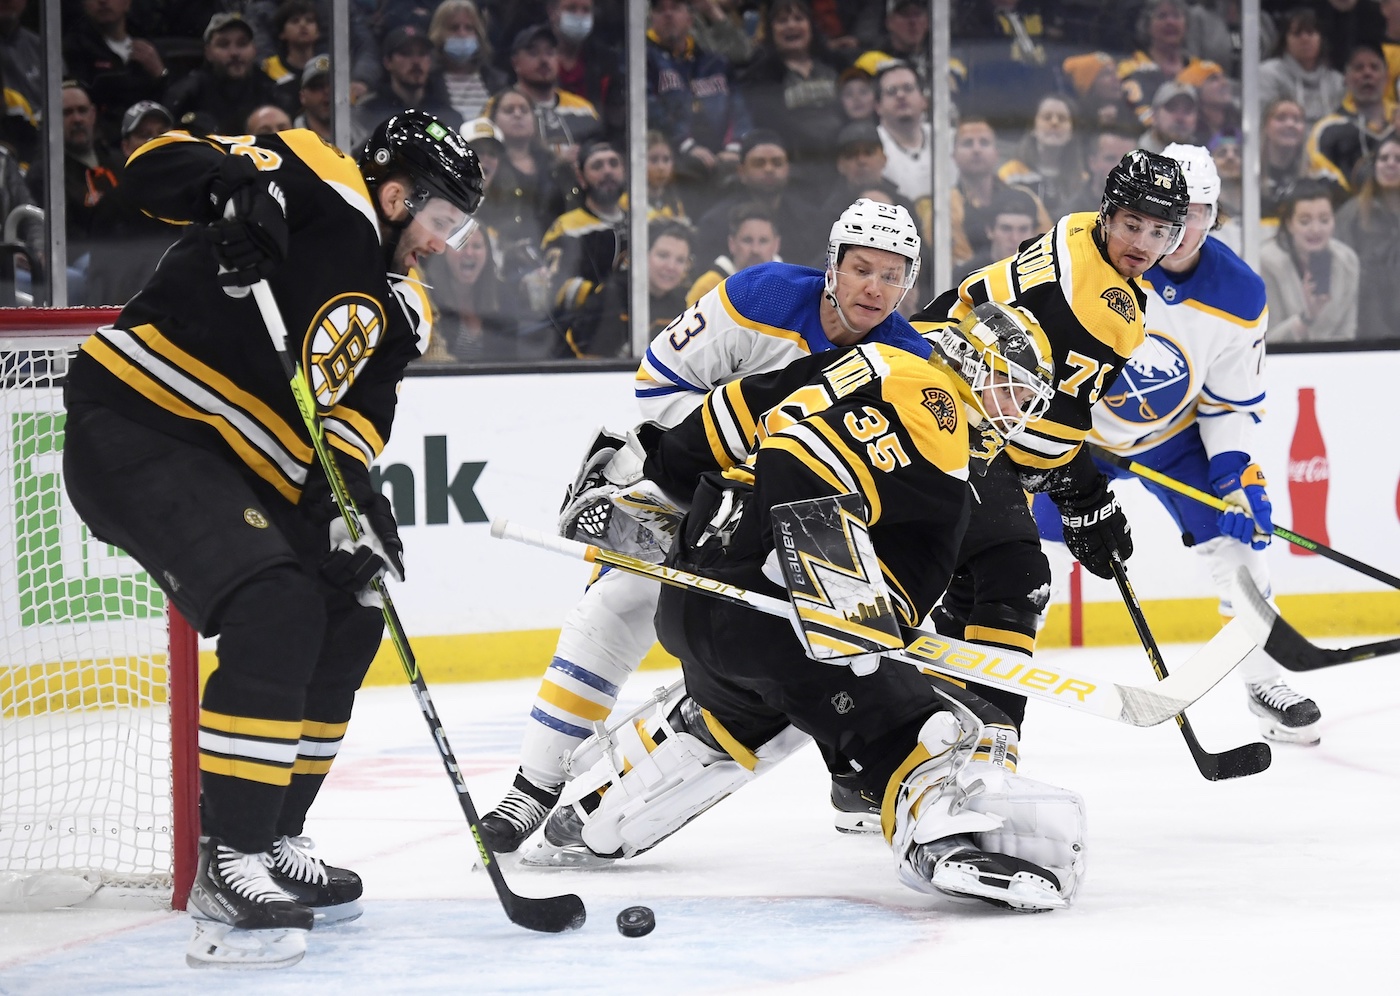 Forbort, Frederic Returning to Boston Bruins Lineup Vs. Tampa